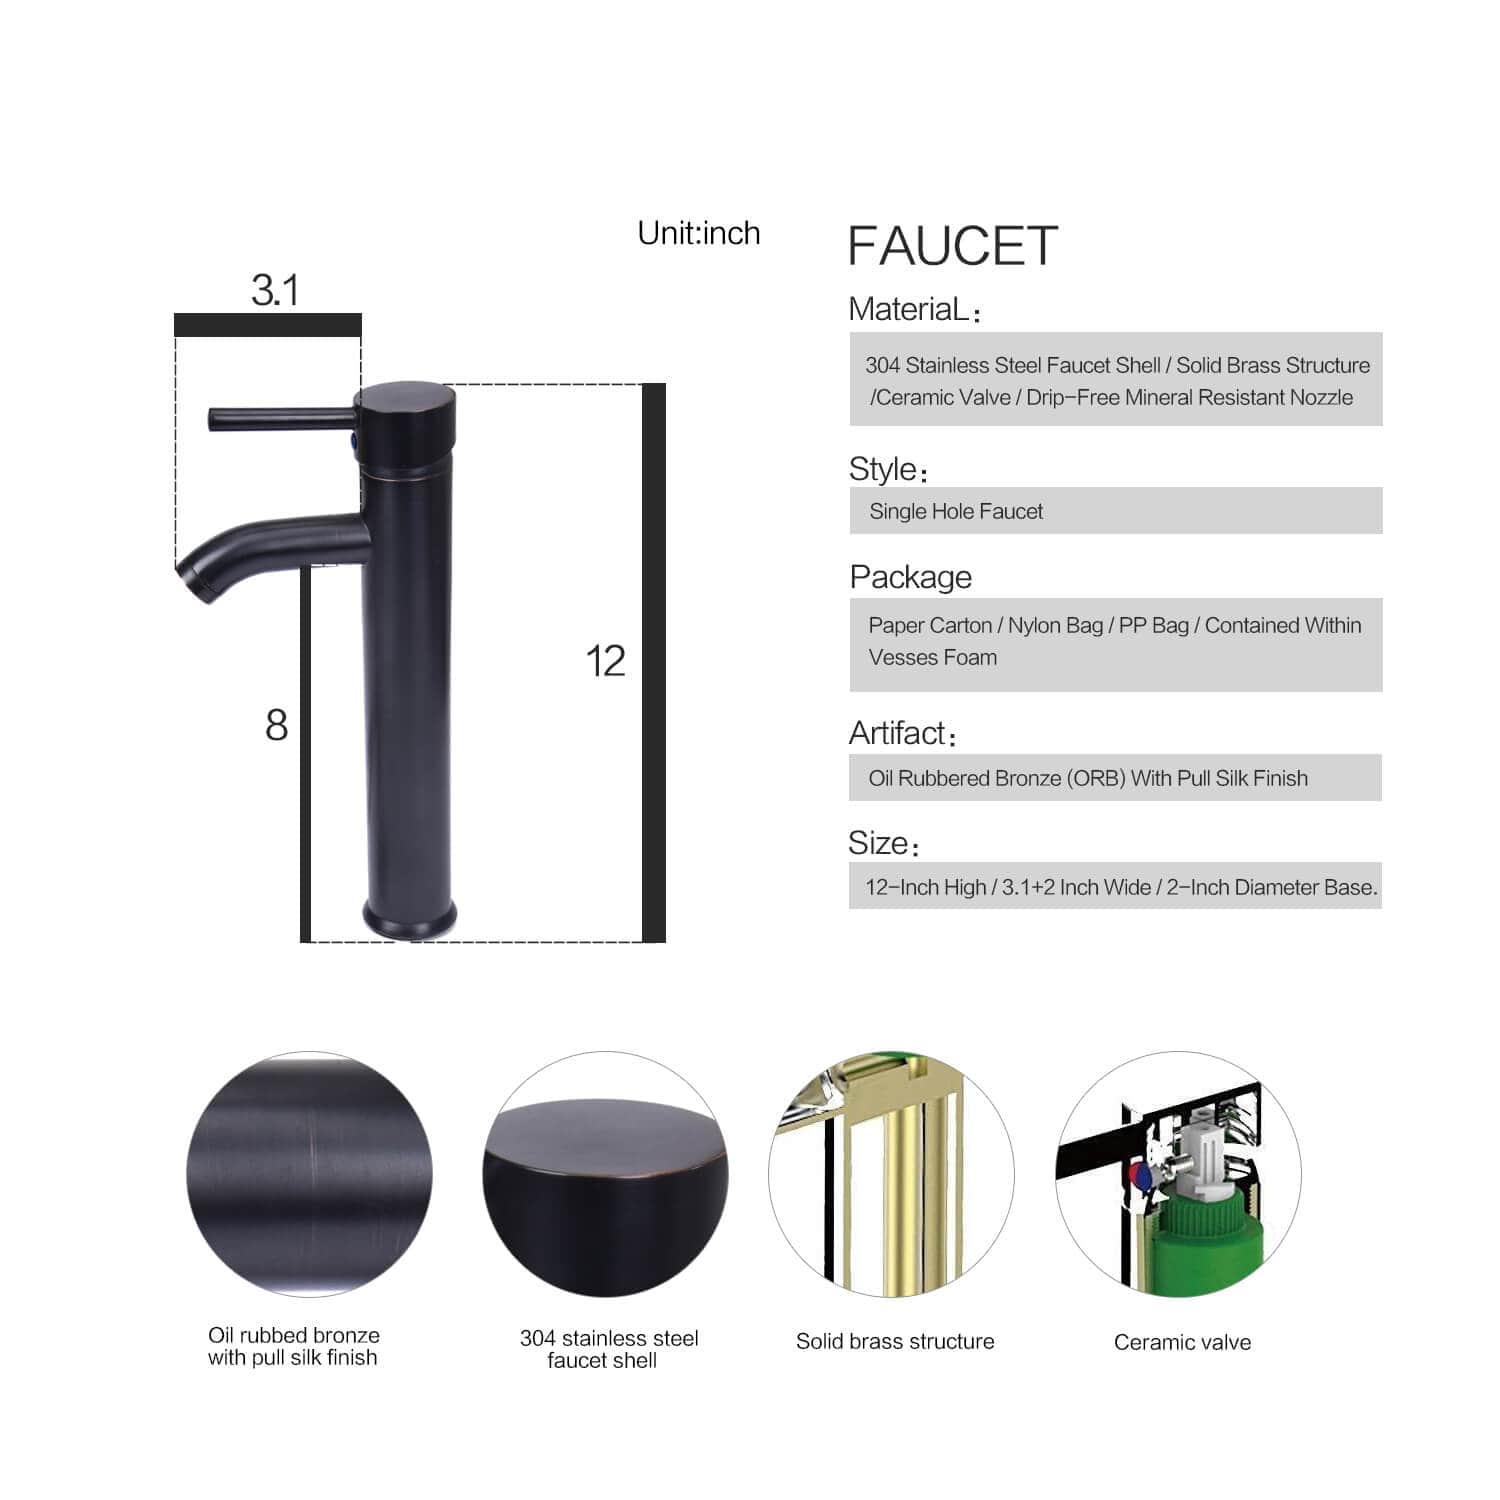 Elecwish ORB faucet specification